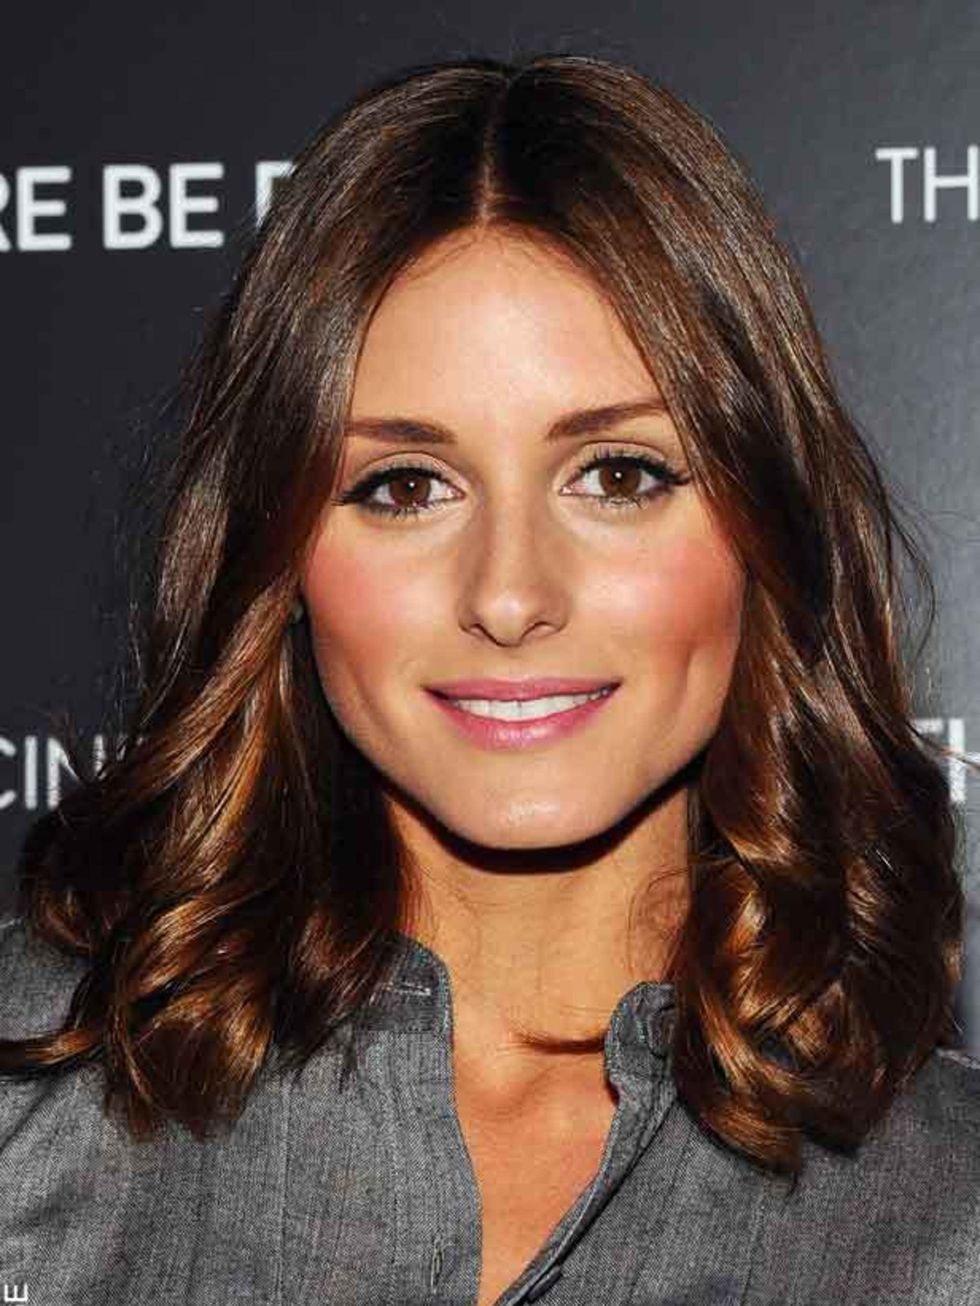 <p><a href="http://www.elleuk.com/starstyle/style-files/(section)/olivia-palermo">Click here to see Olivia's style file...</a></p>